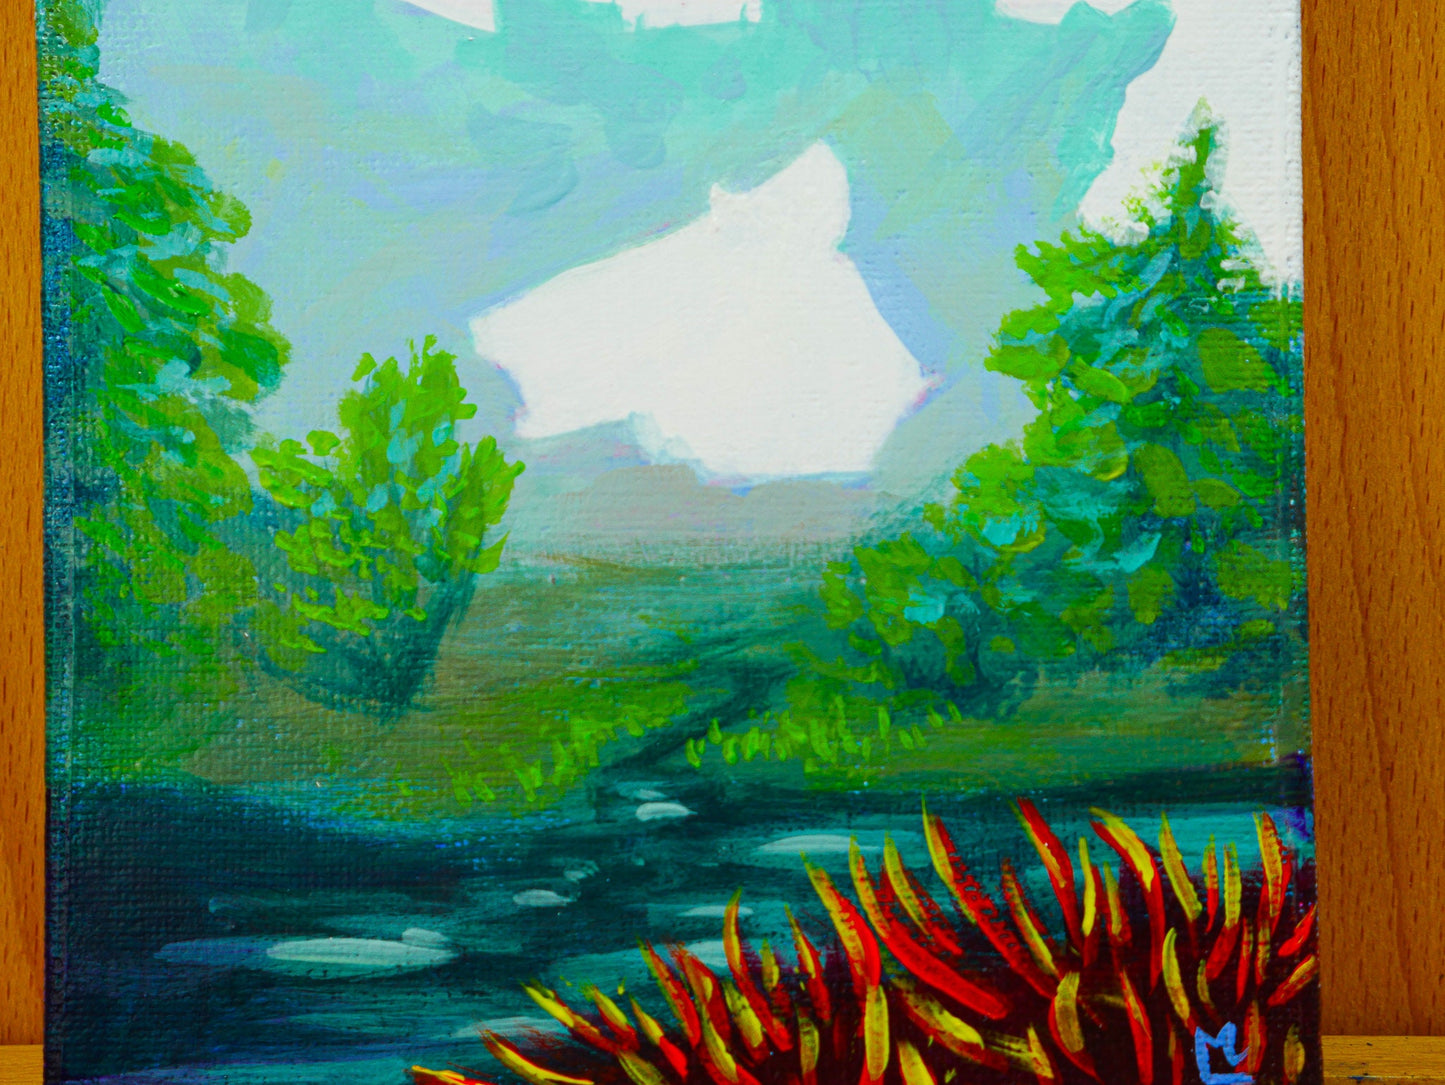 5x7 inch Solitude-inspired Hand-Made Canvas Painting - Mini Landscape Painting, RPG & Videogame Landscape Art